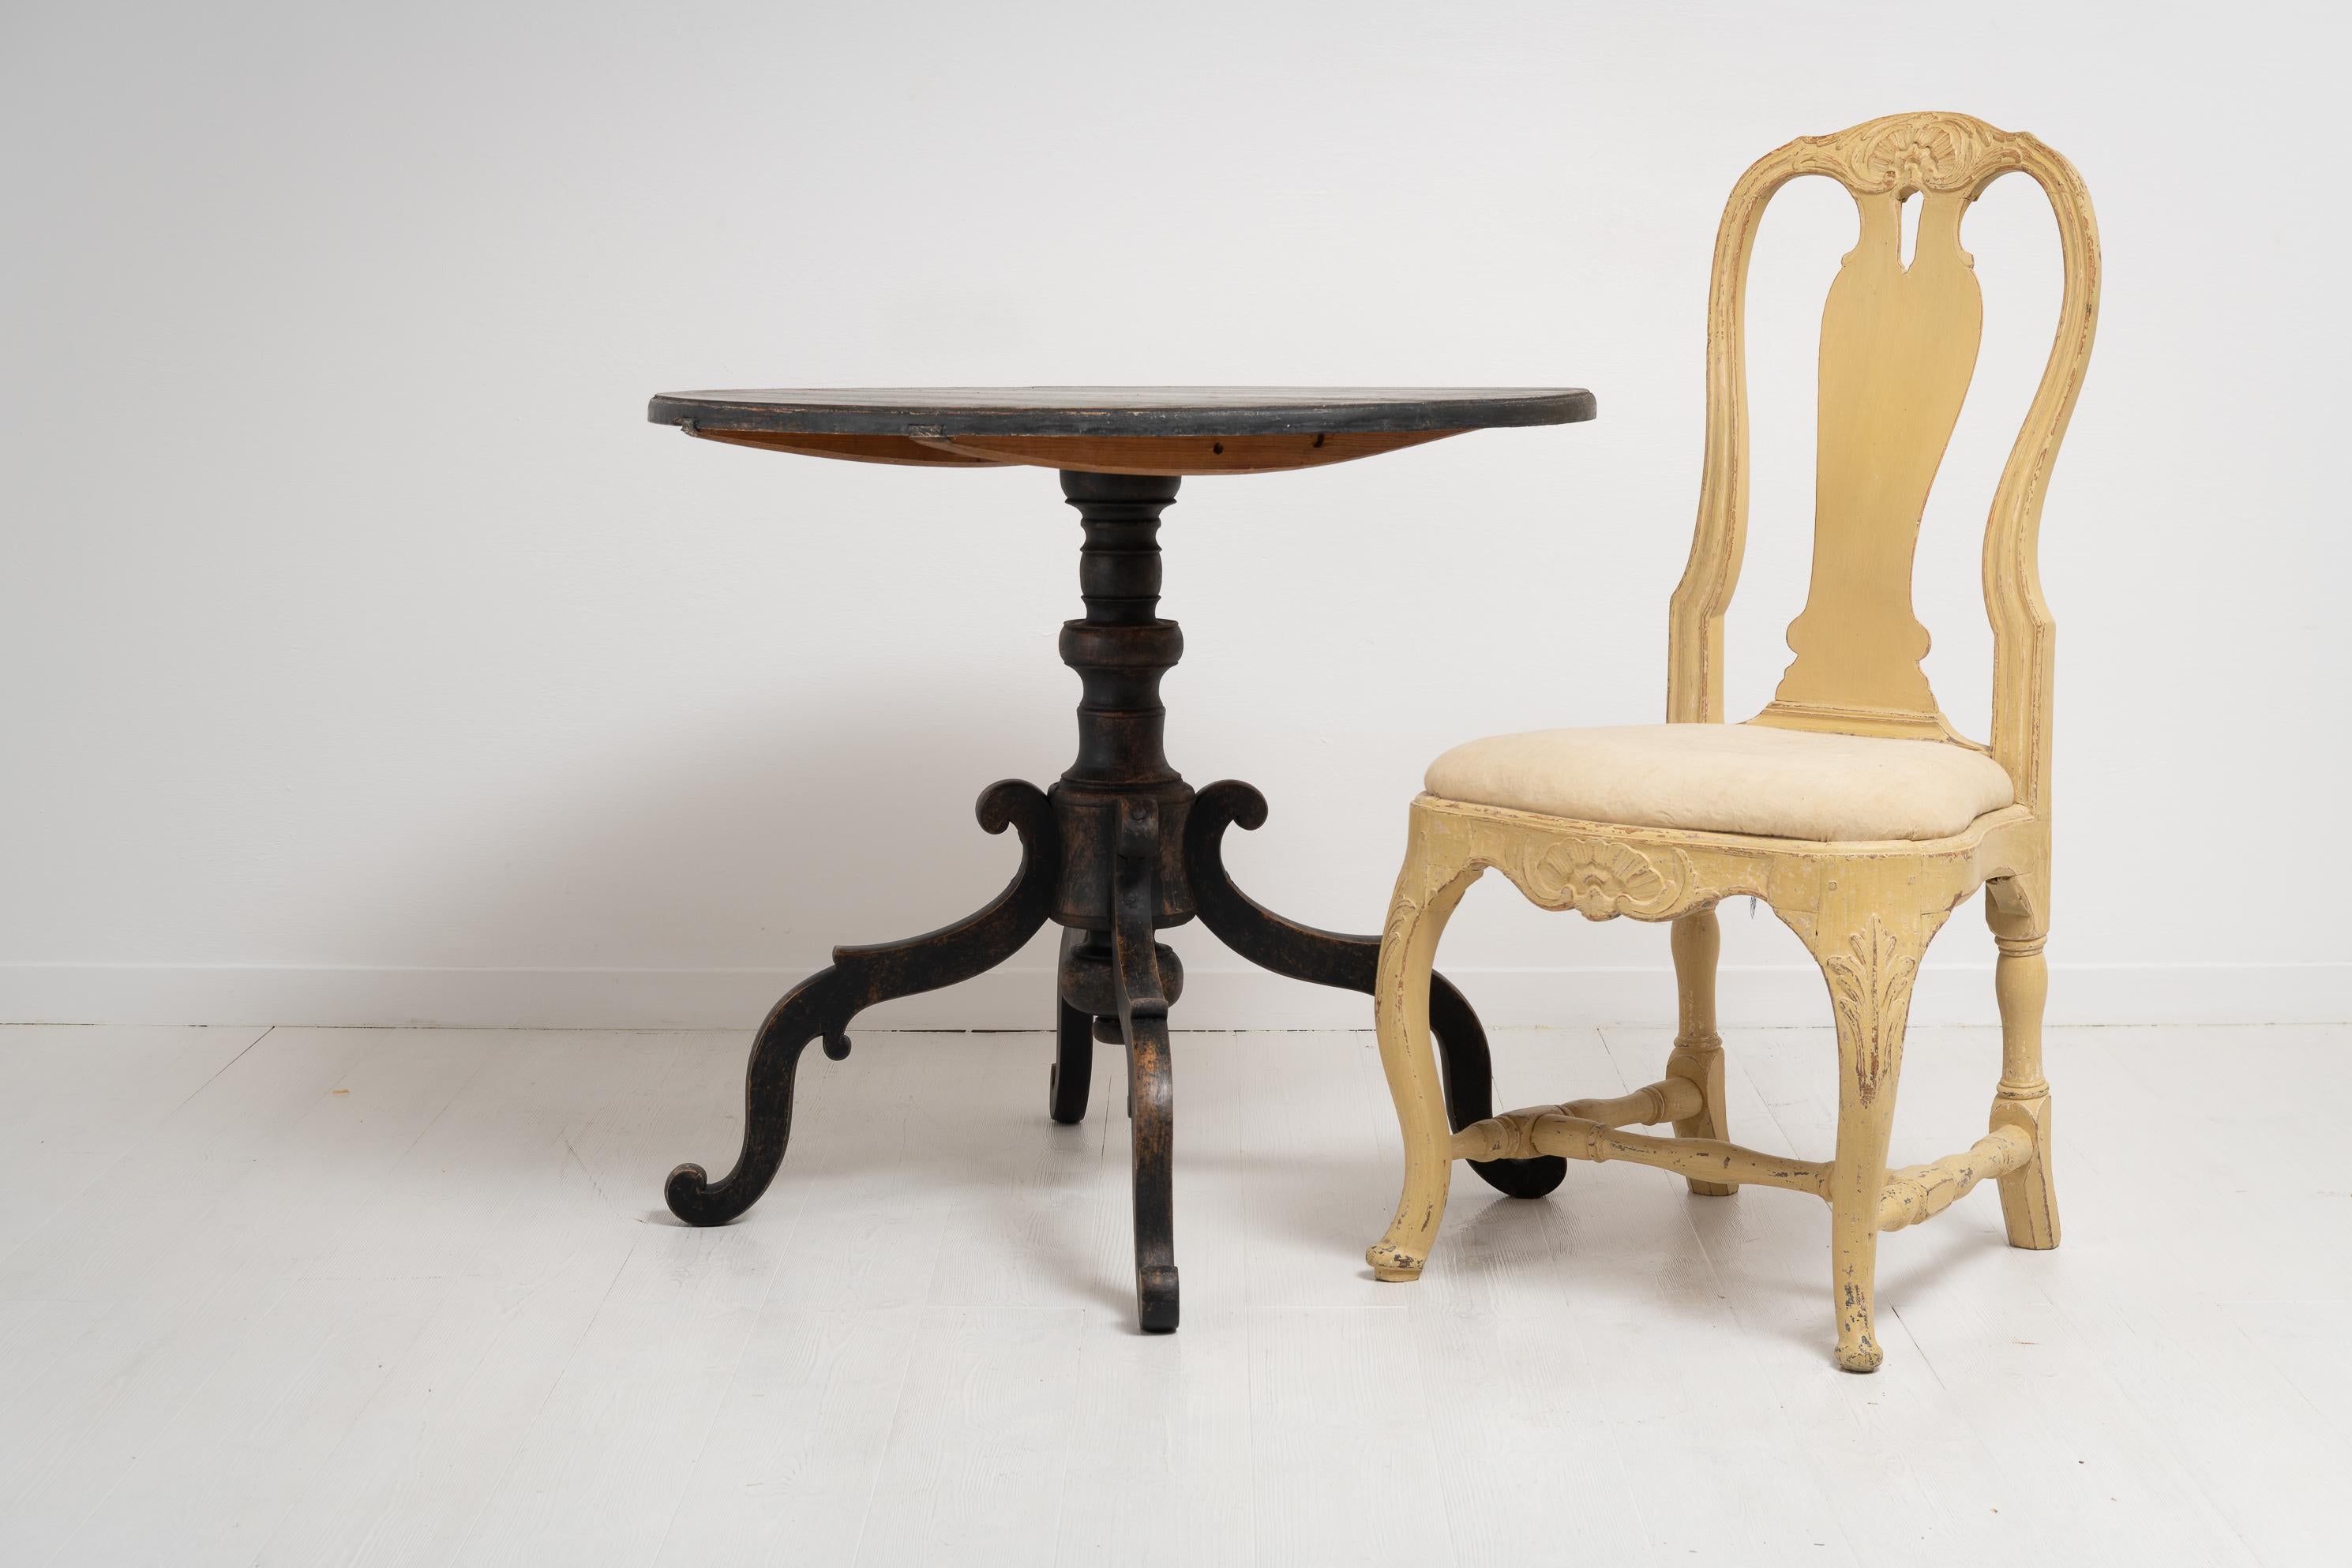 19th century northern Swedish large black tilt-top table with a large center table top and pedestal base with 4 ornate legs. The shape of the legs is unusual with the almost spider shaped legs. Made in Swedish pine with distressed black paint. Dated